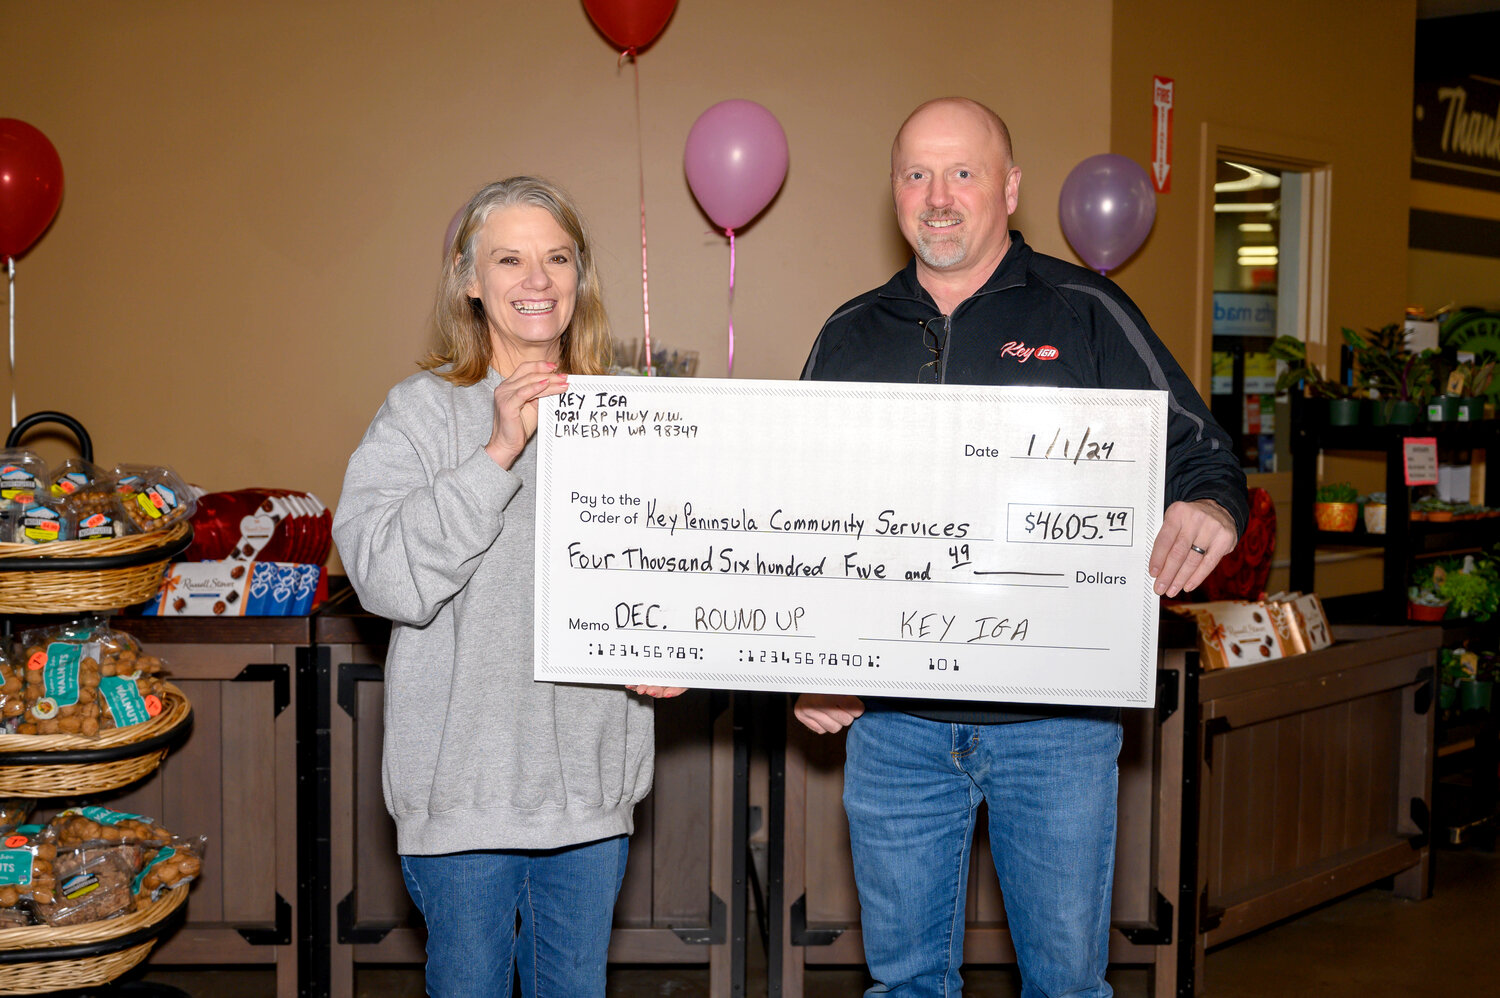 Key IGA Manager Kip Bonds presents a check to Key Peninsula Community Services Volunteer Coordinator Teresa Conness from month-long Round-Up campaign for KPCS.